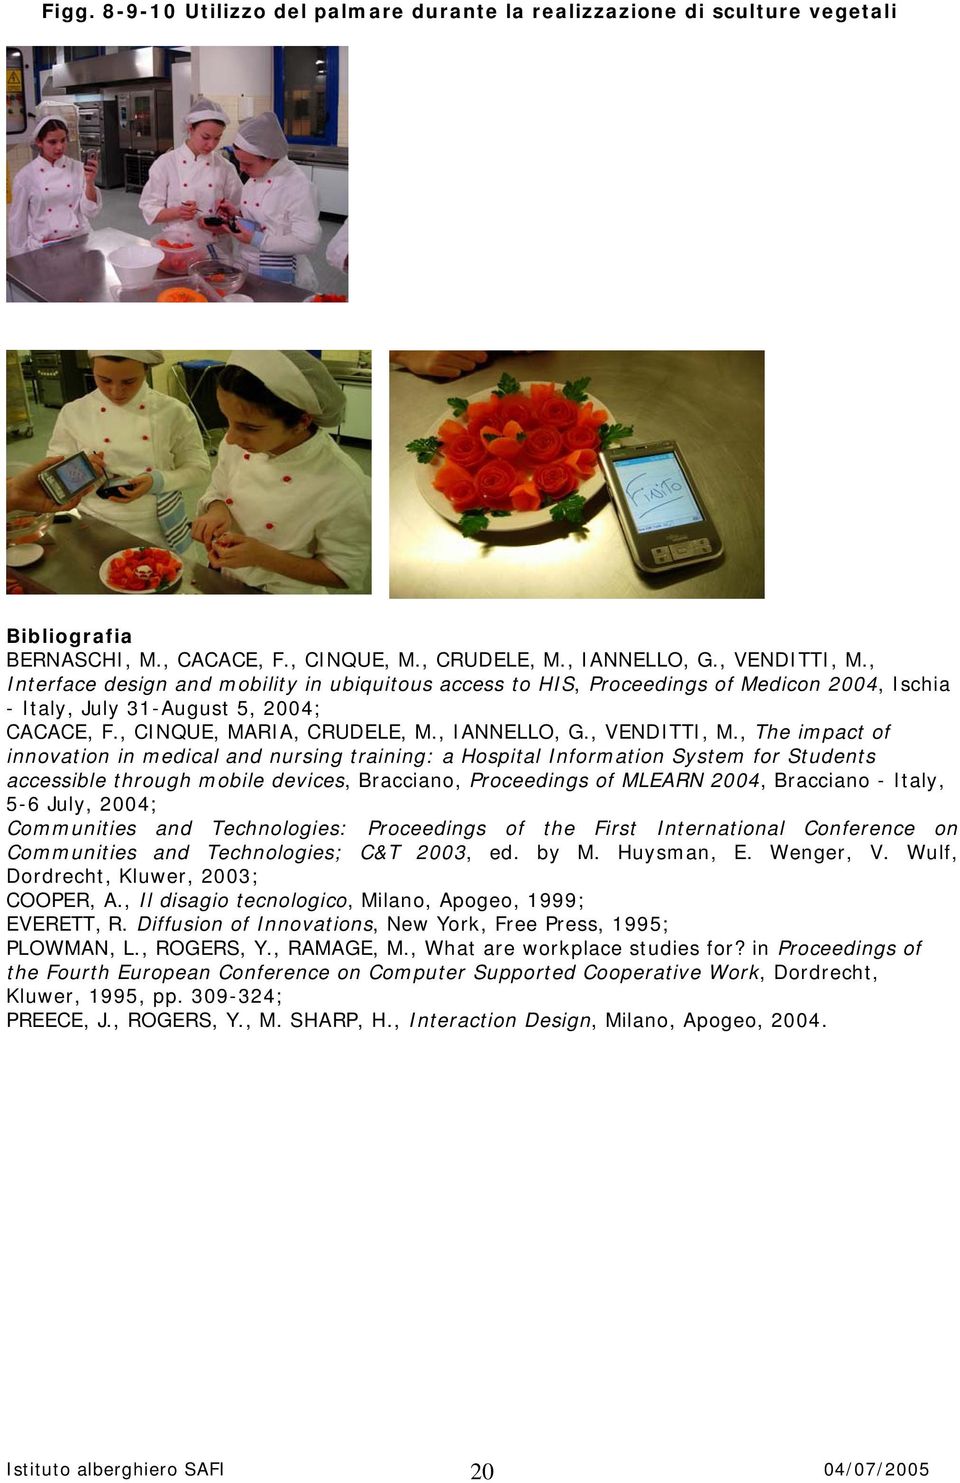 , The impact of innovation in medical and nursing training: a Hospital Information System for Students accessible through mobile devices, Bracciano, Proceedings of MLEARN 2004, Bracciano - Italy, 5-6